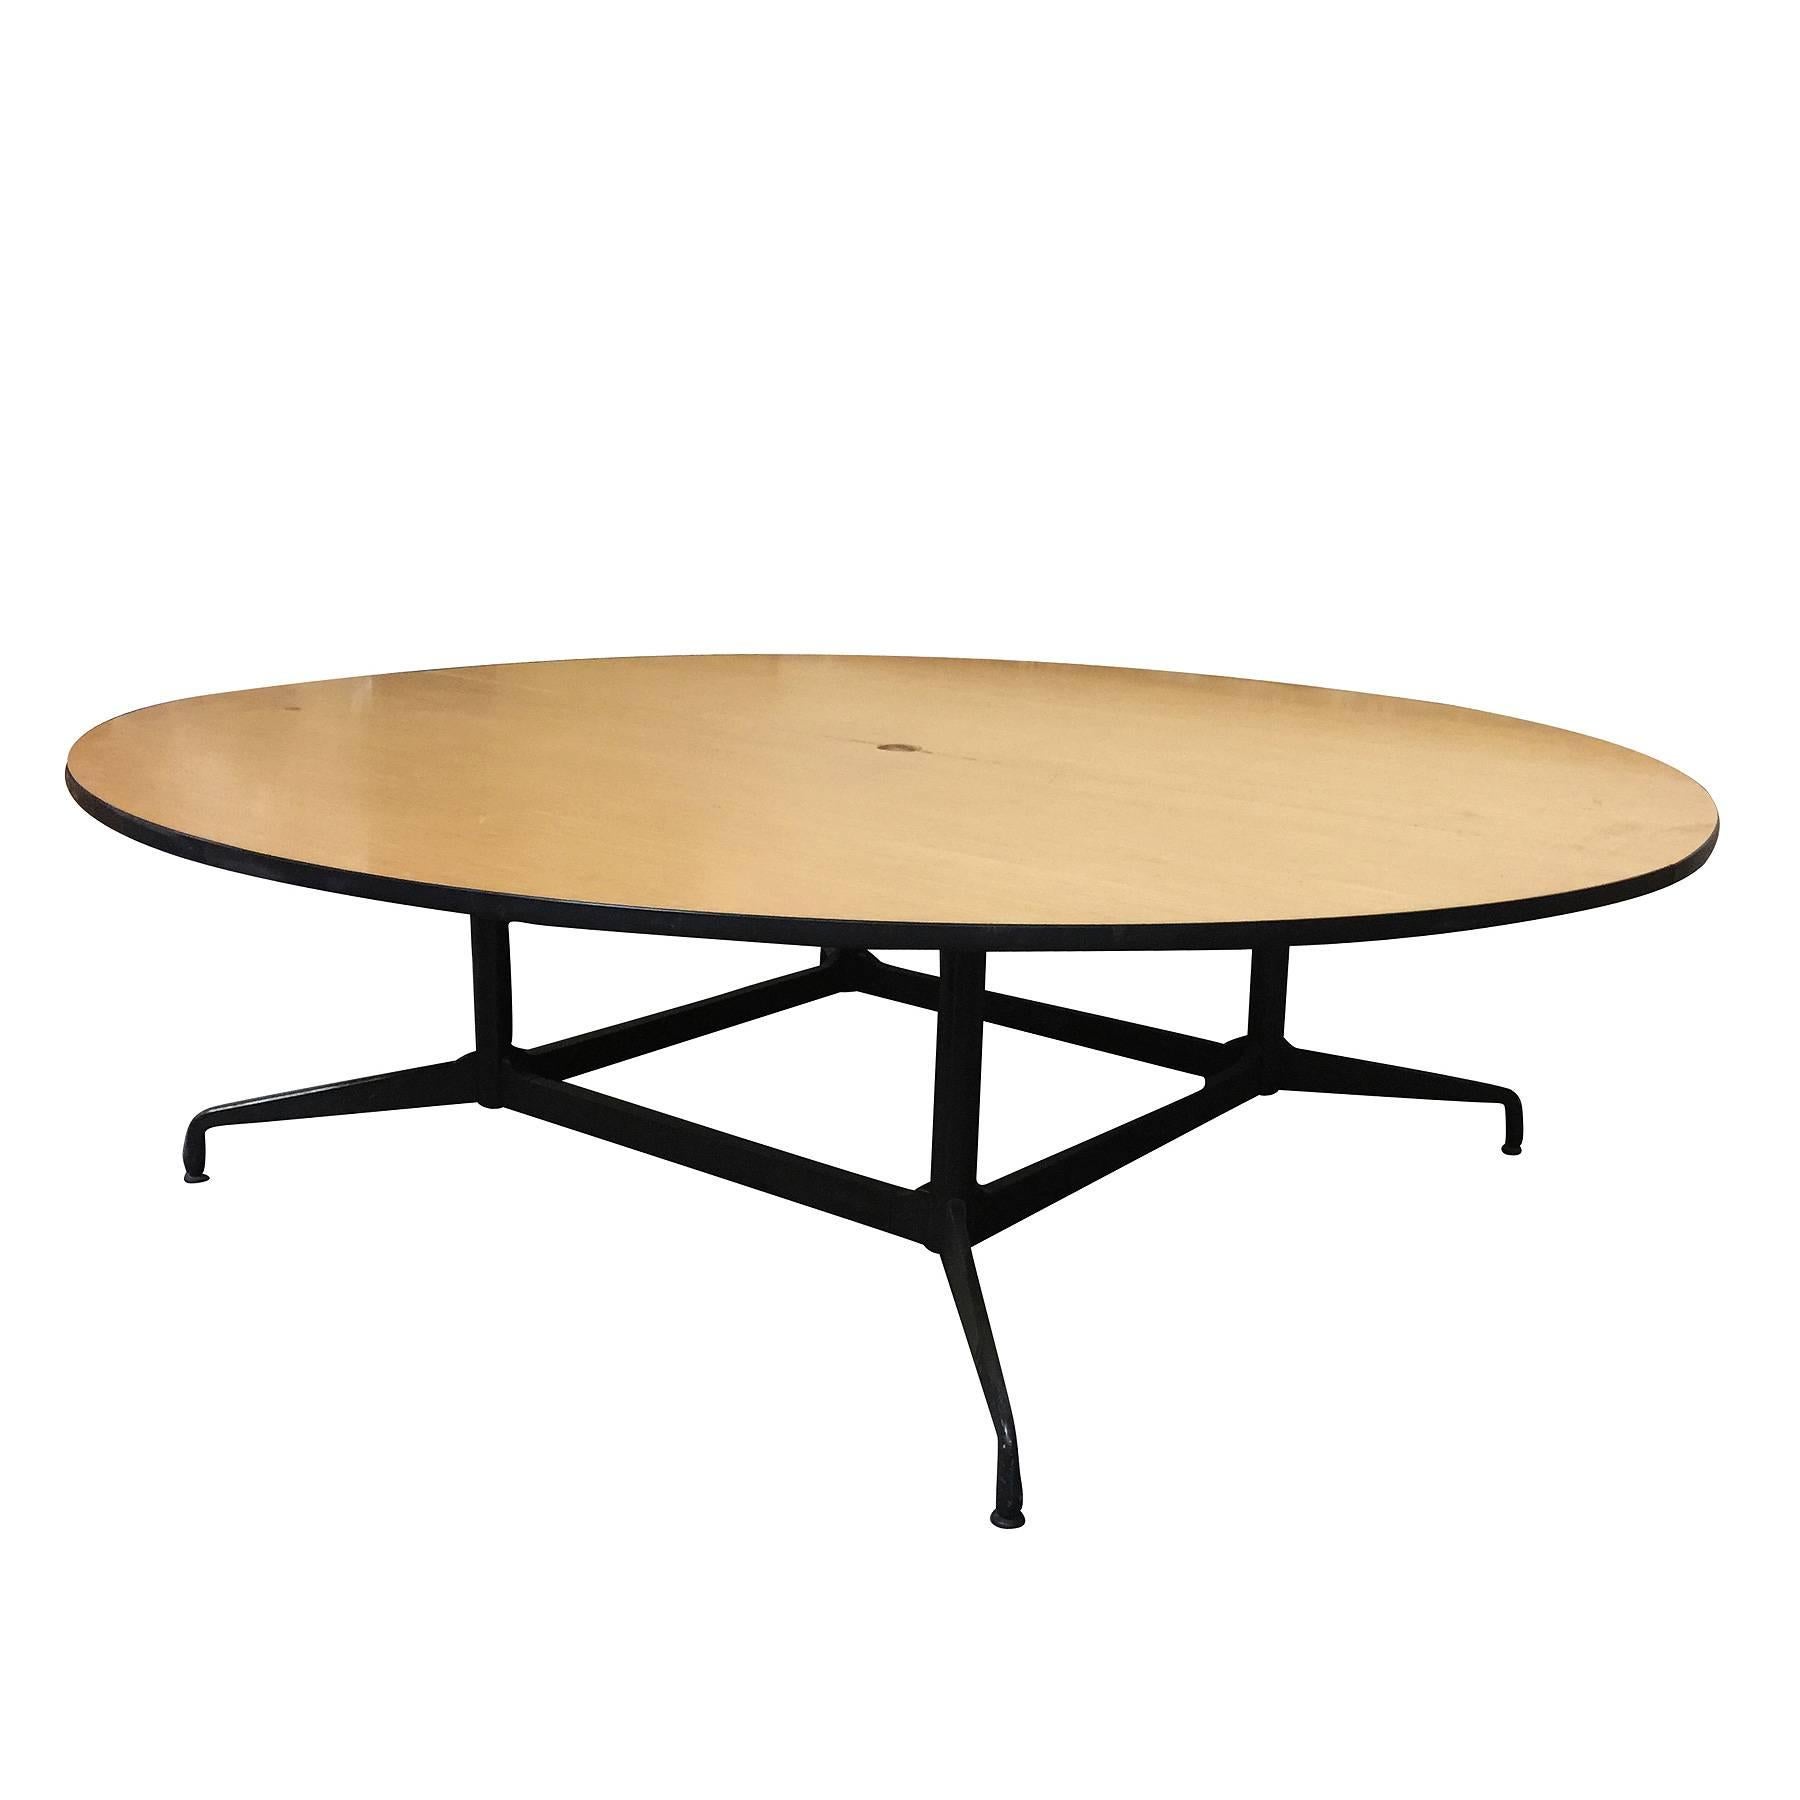 
Large 8' foot Charles and Ray Eames designed round conference table by Herman Miller. 

The table features a large two-piece round laminate oak veneer wood top with a steel and aluminum base. This is a conference table that will easily impress,